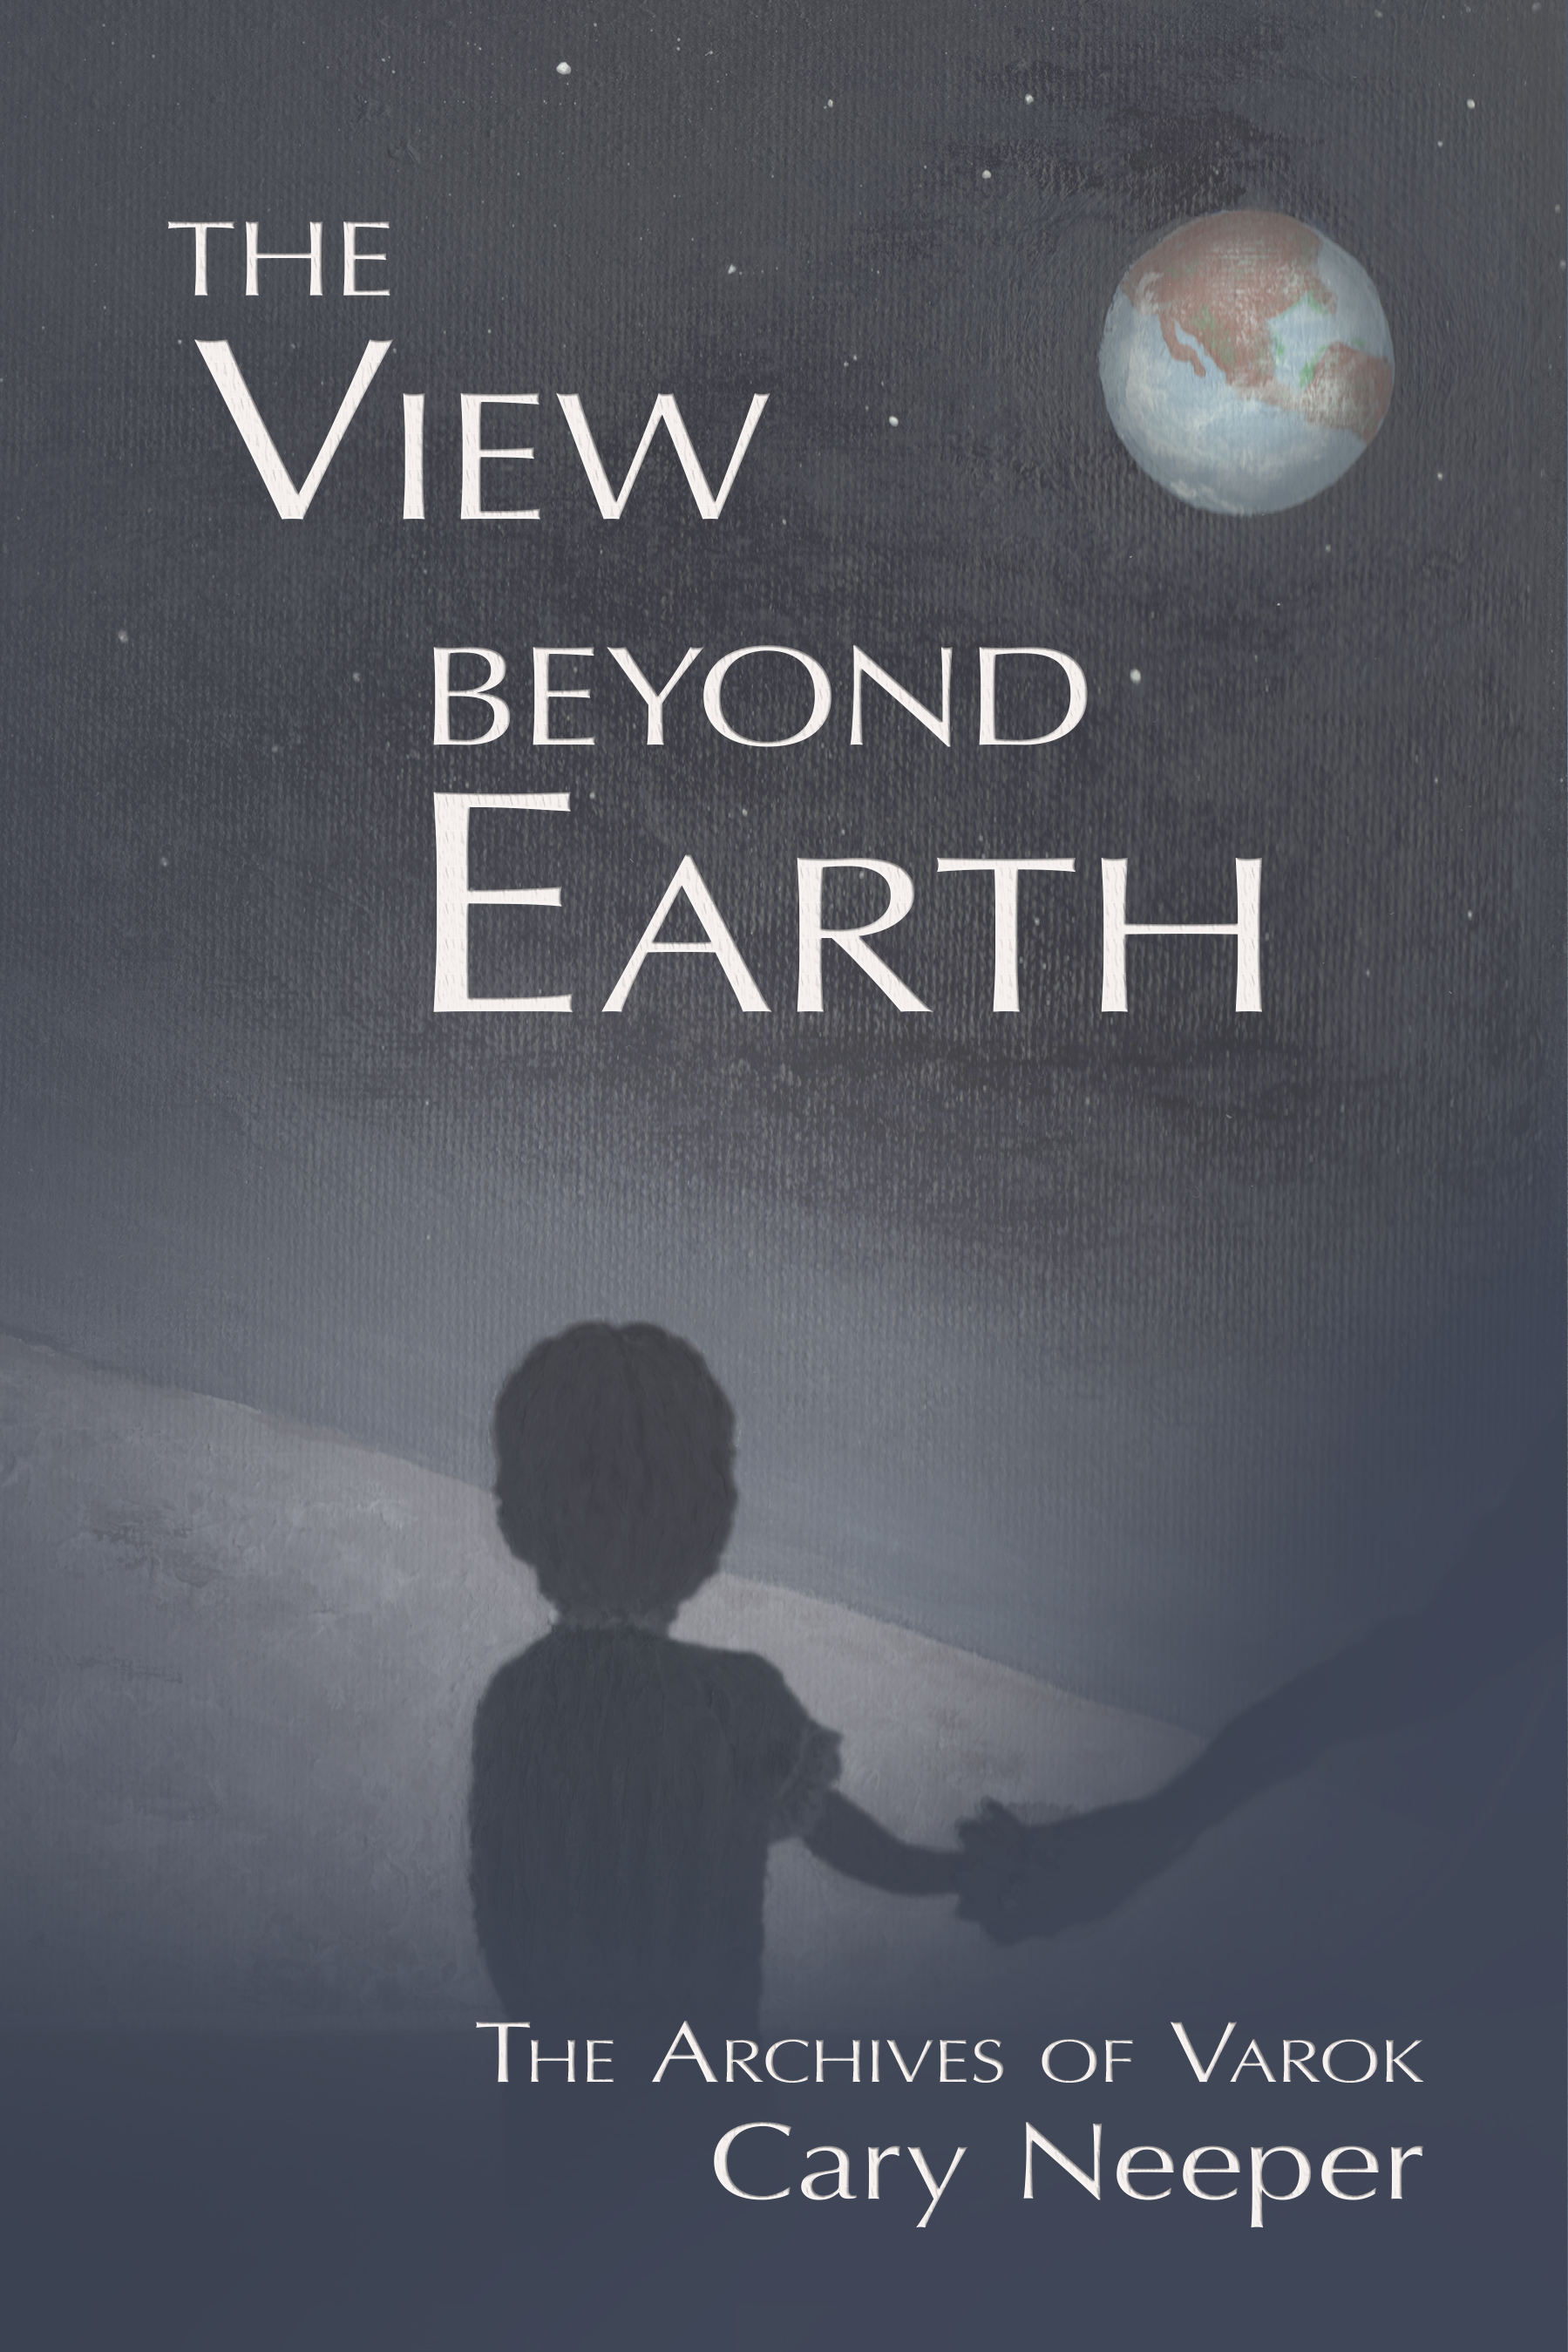 book cover image: view of Earth from the moon. Cover painting by Cary Neeper.